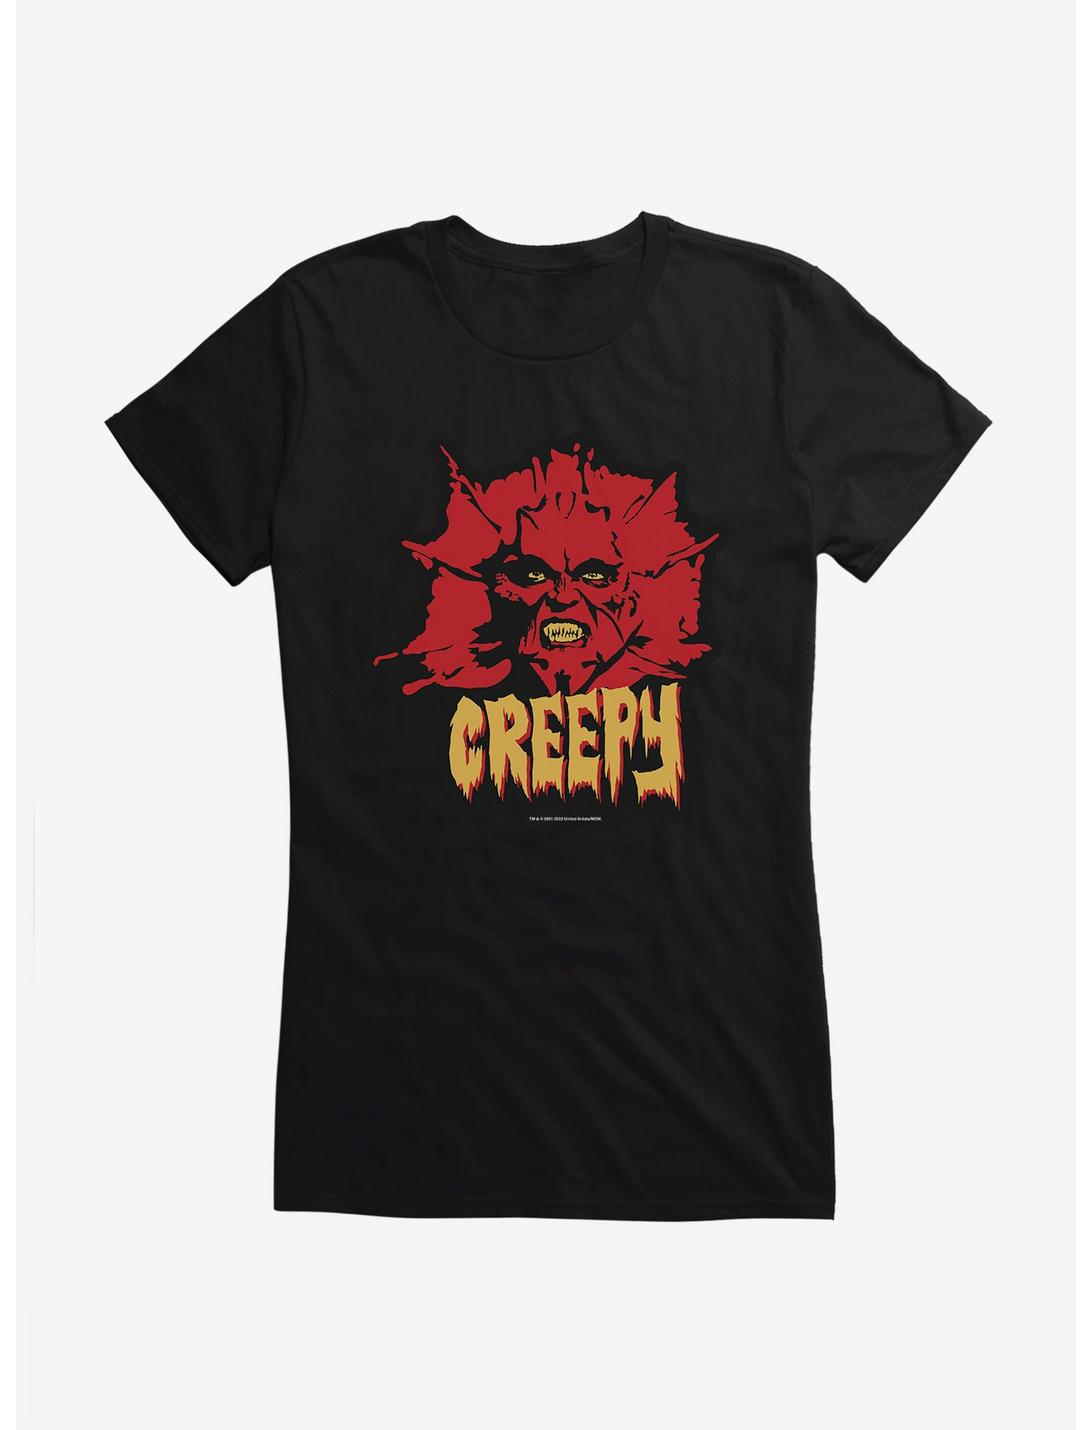 Jeepers Creepers Creepy Girls T-Shirt, BLACK, hi-res